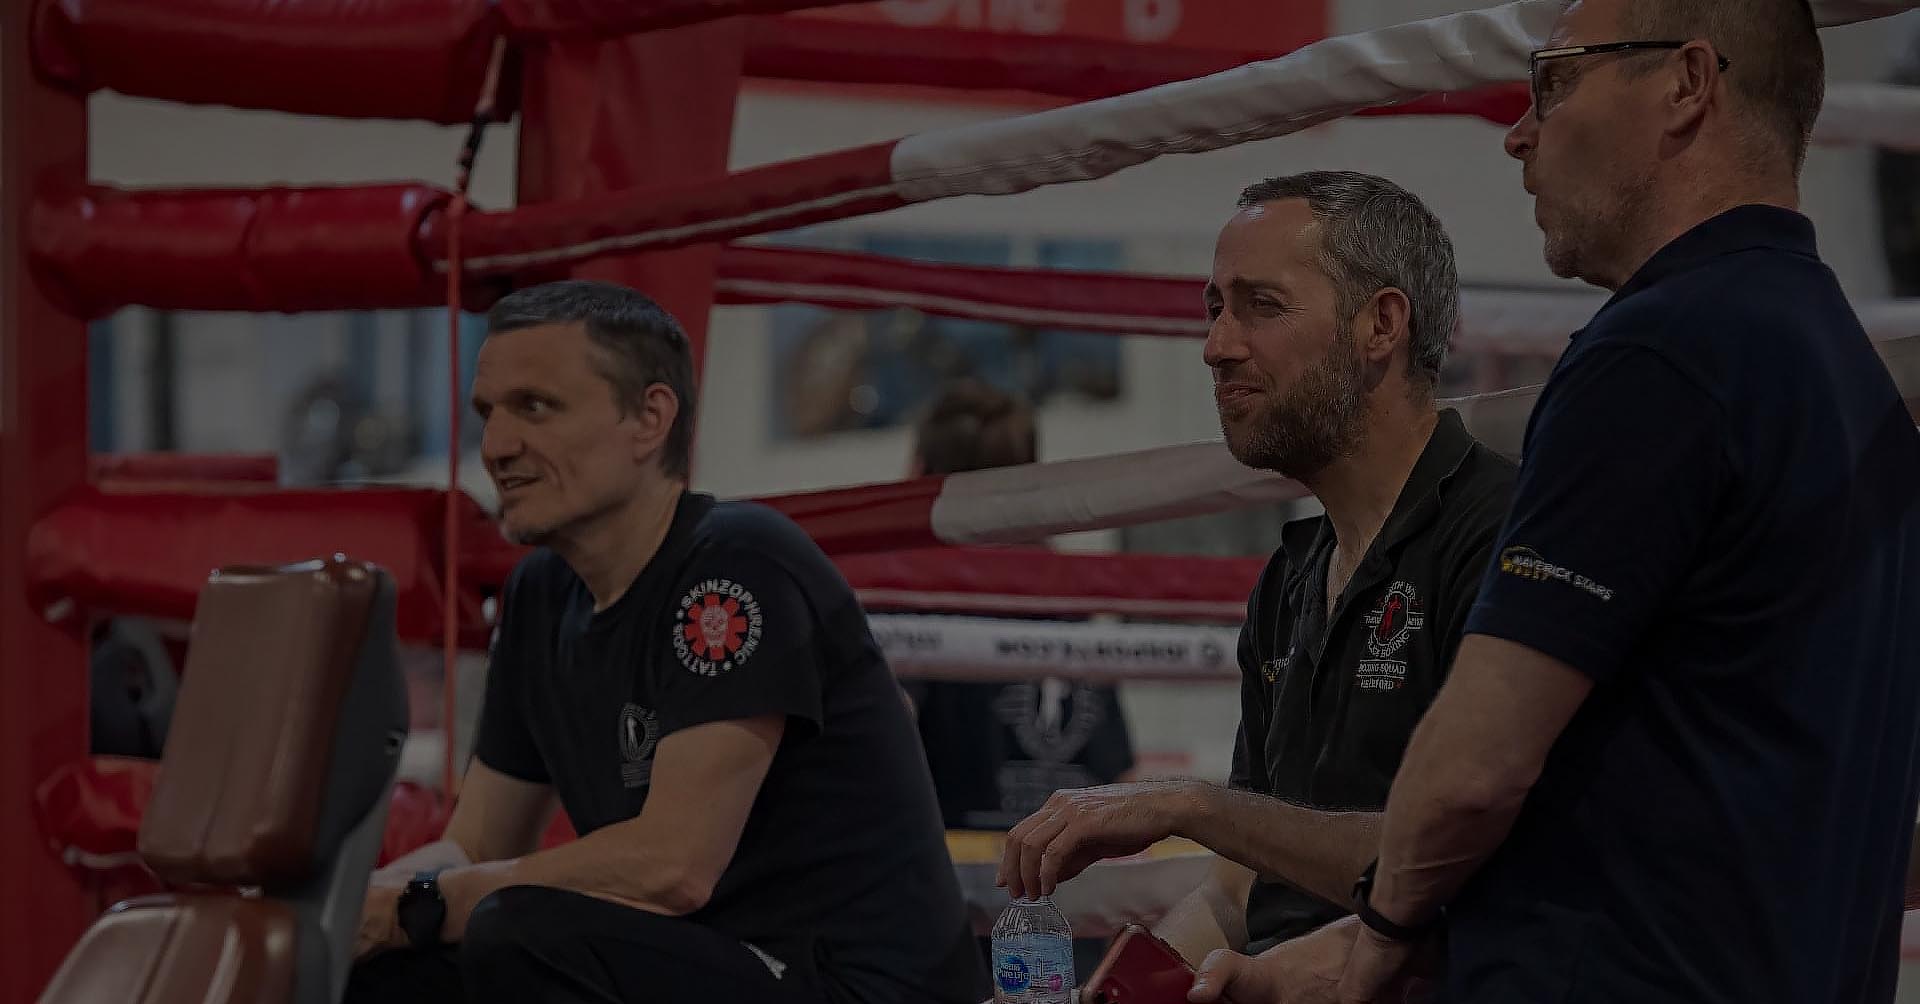 Coaches looking on at South Wye Police Boxing Academy